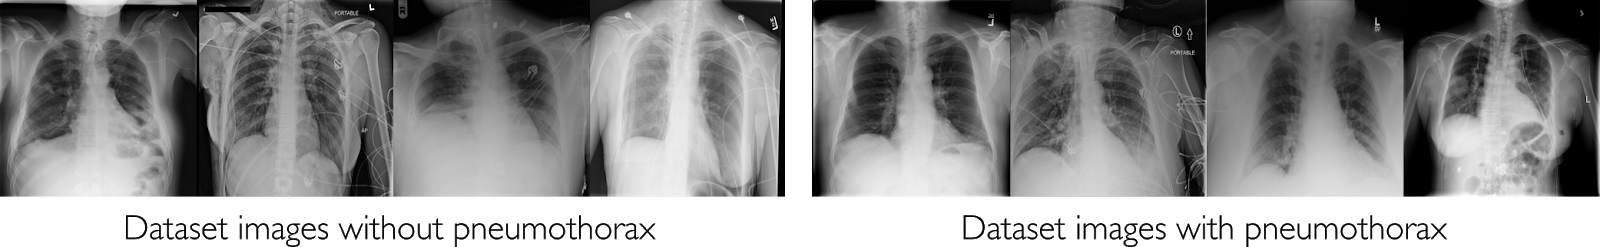 dataset images with and without pneumothorax